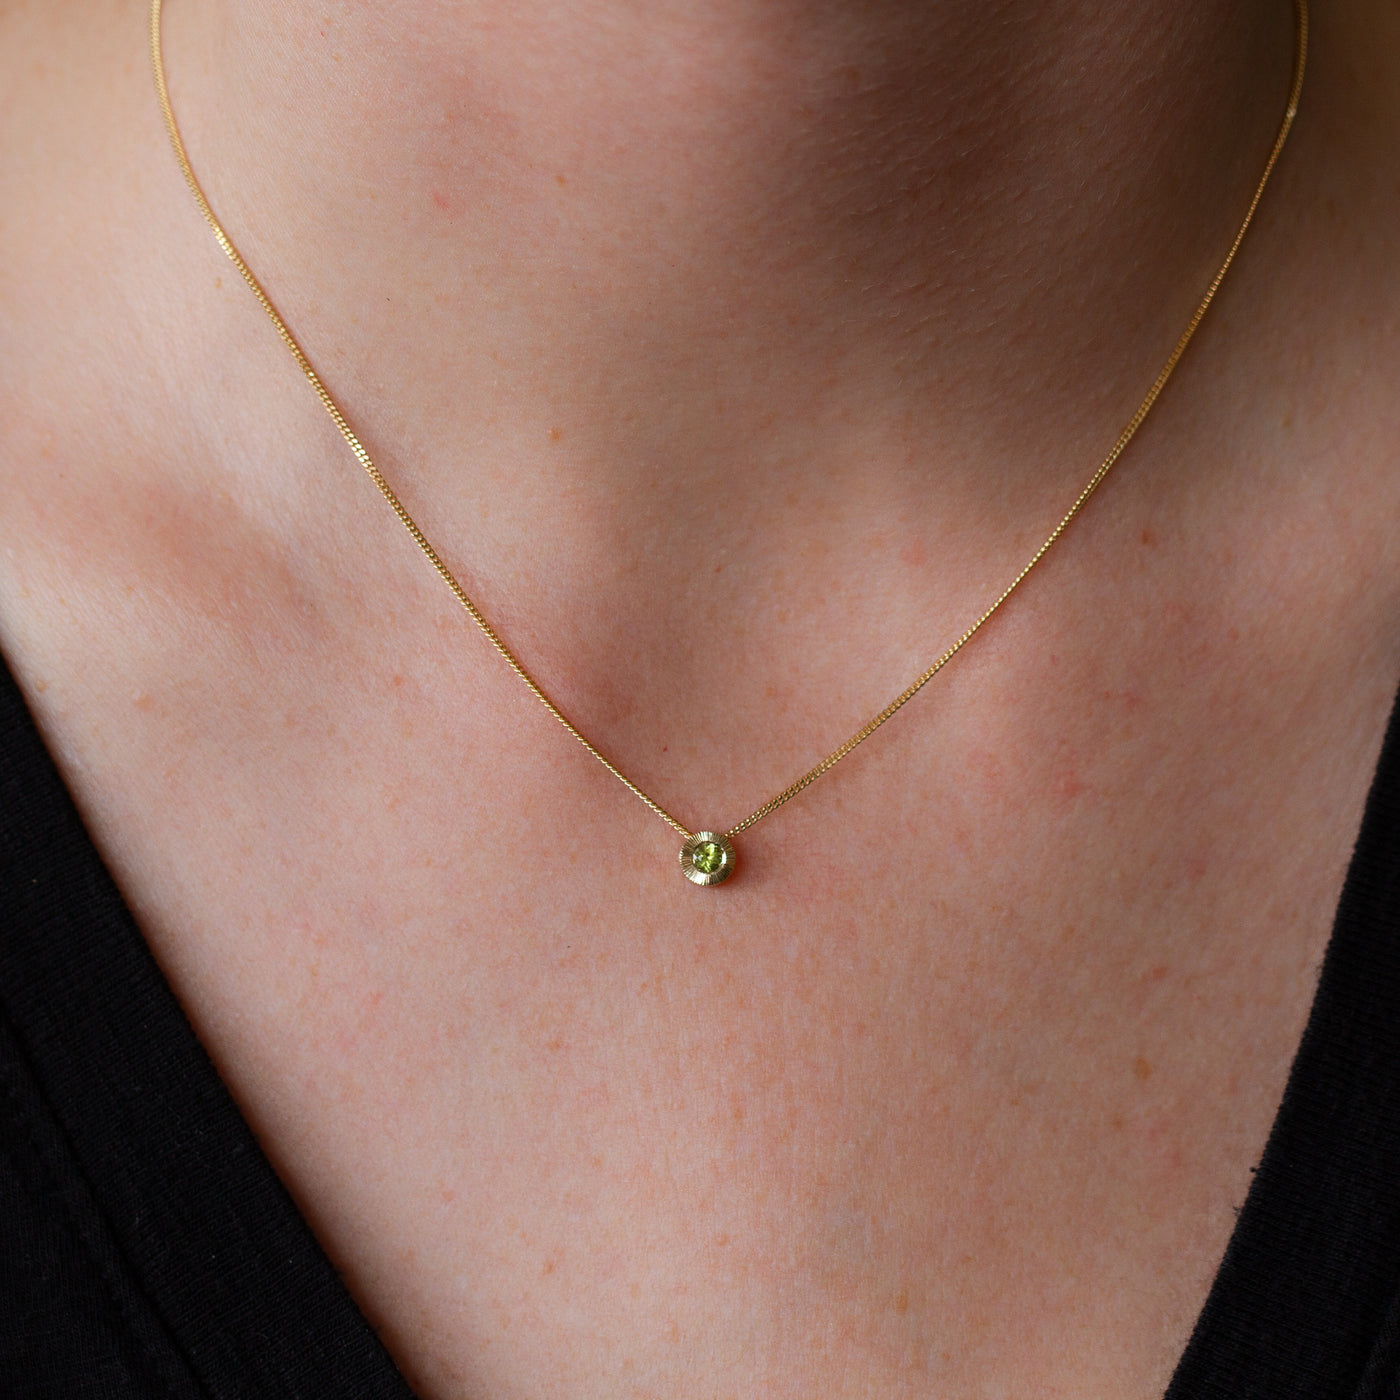 August birthstone Aurora slide necklace with peridot in gold on a neck